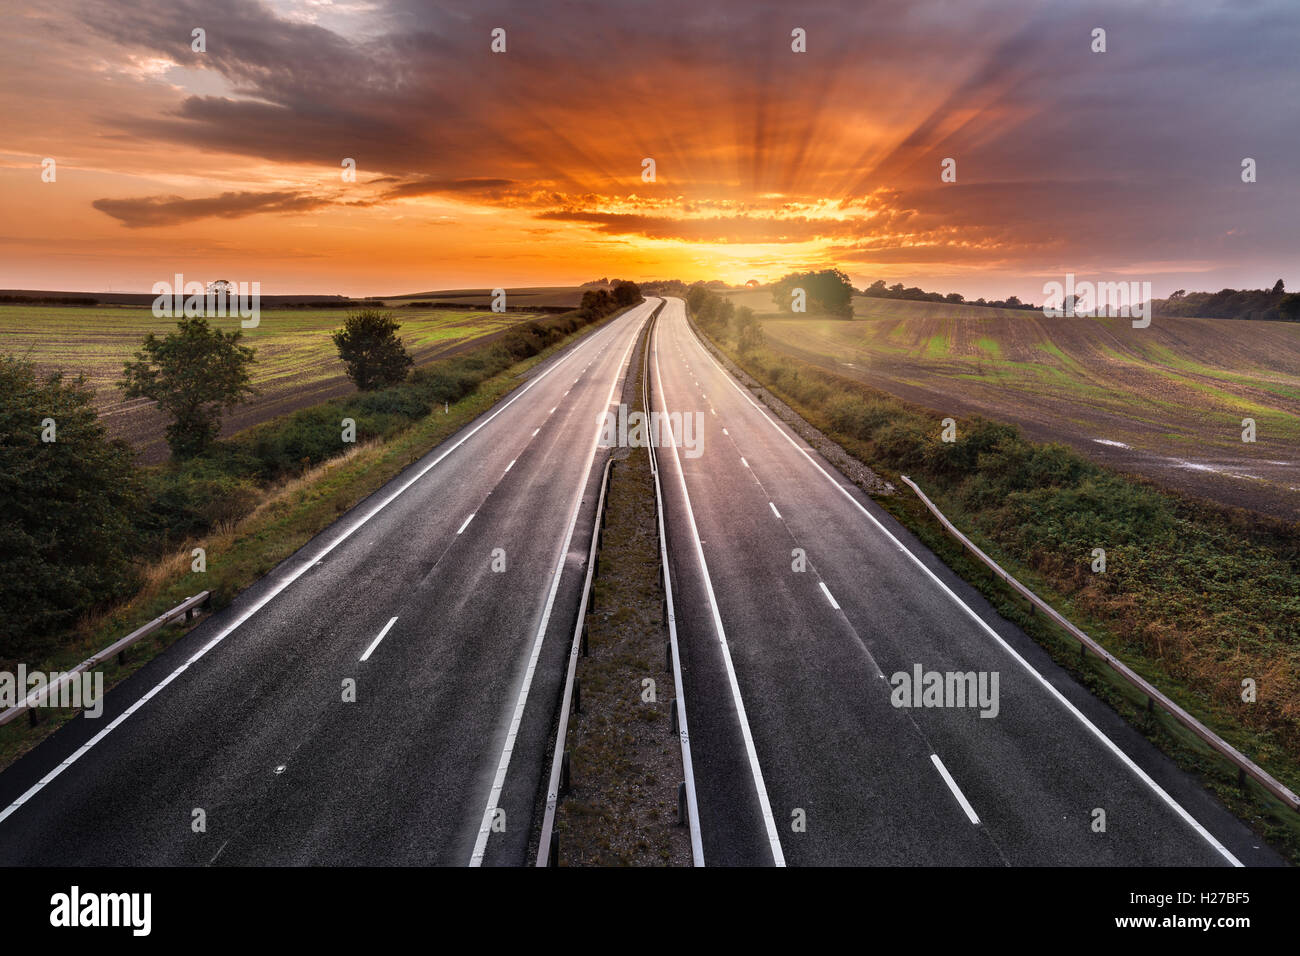 Sunset Sky over Empty Asphalt Road of Dual Carriage Motorway Stock Photo